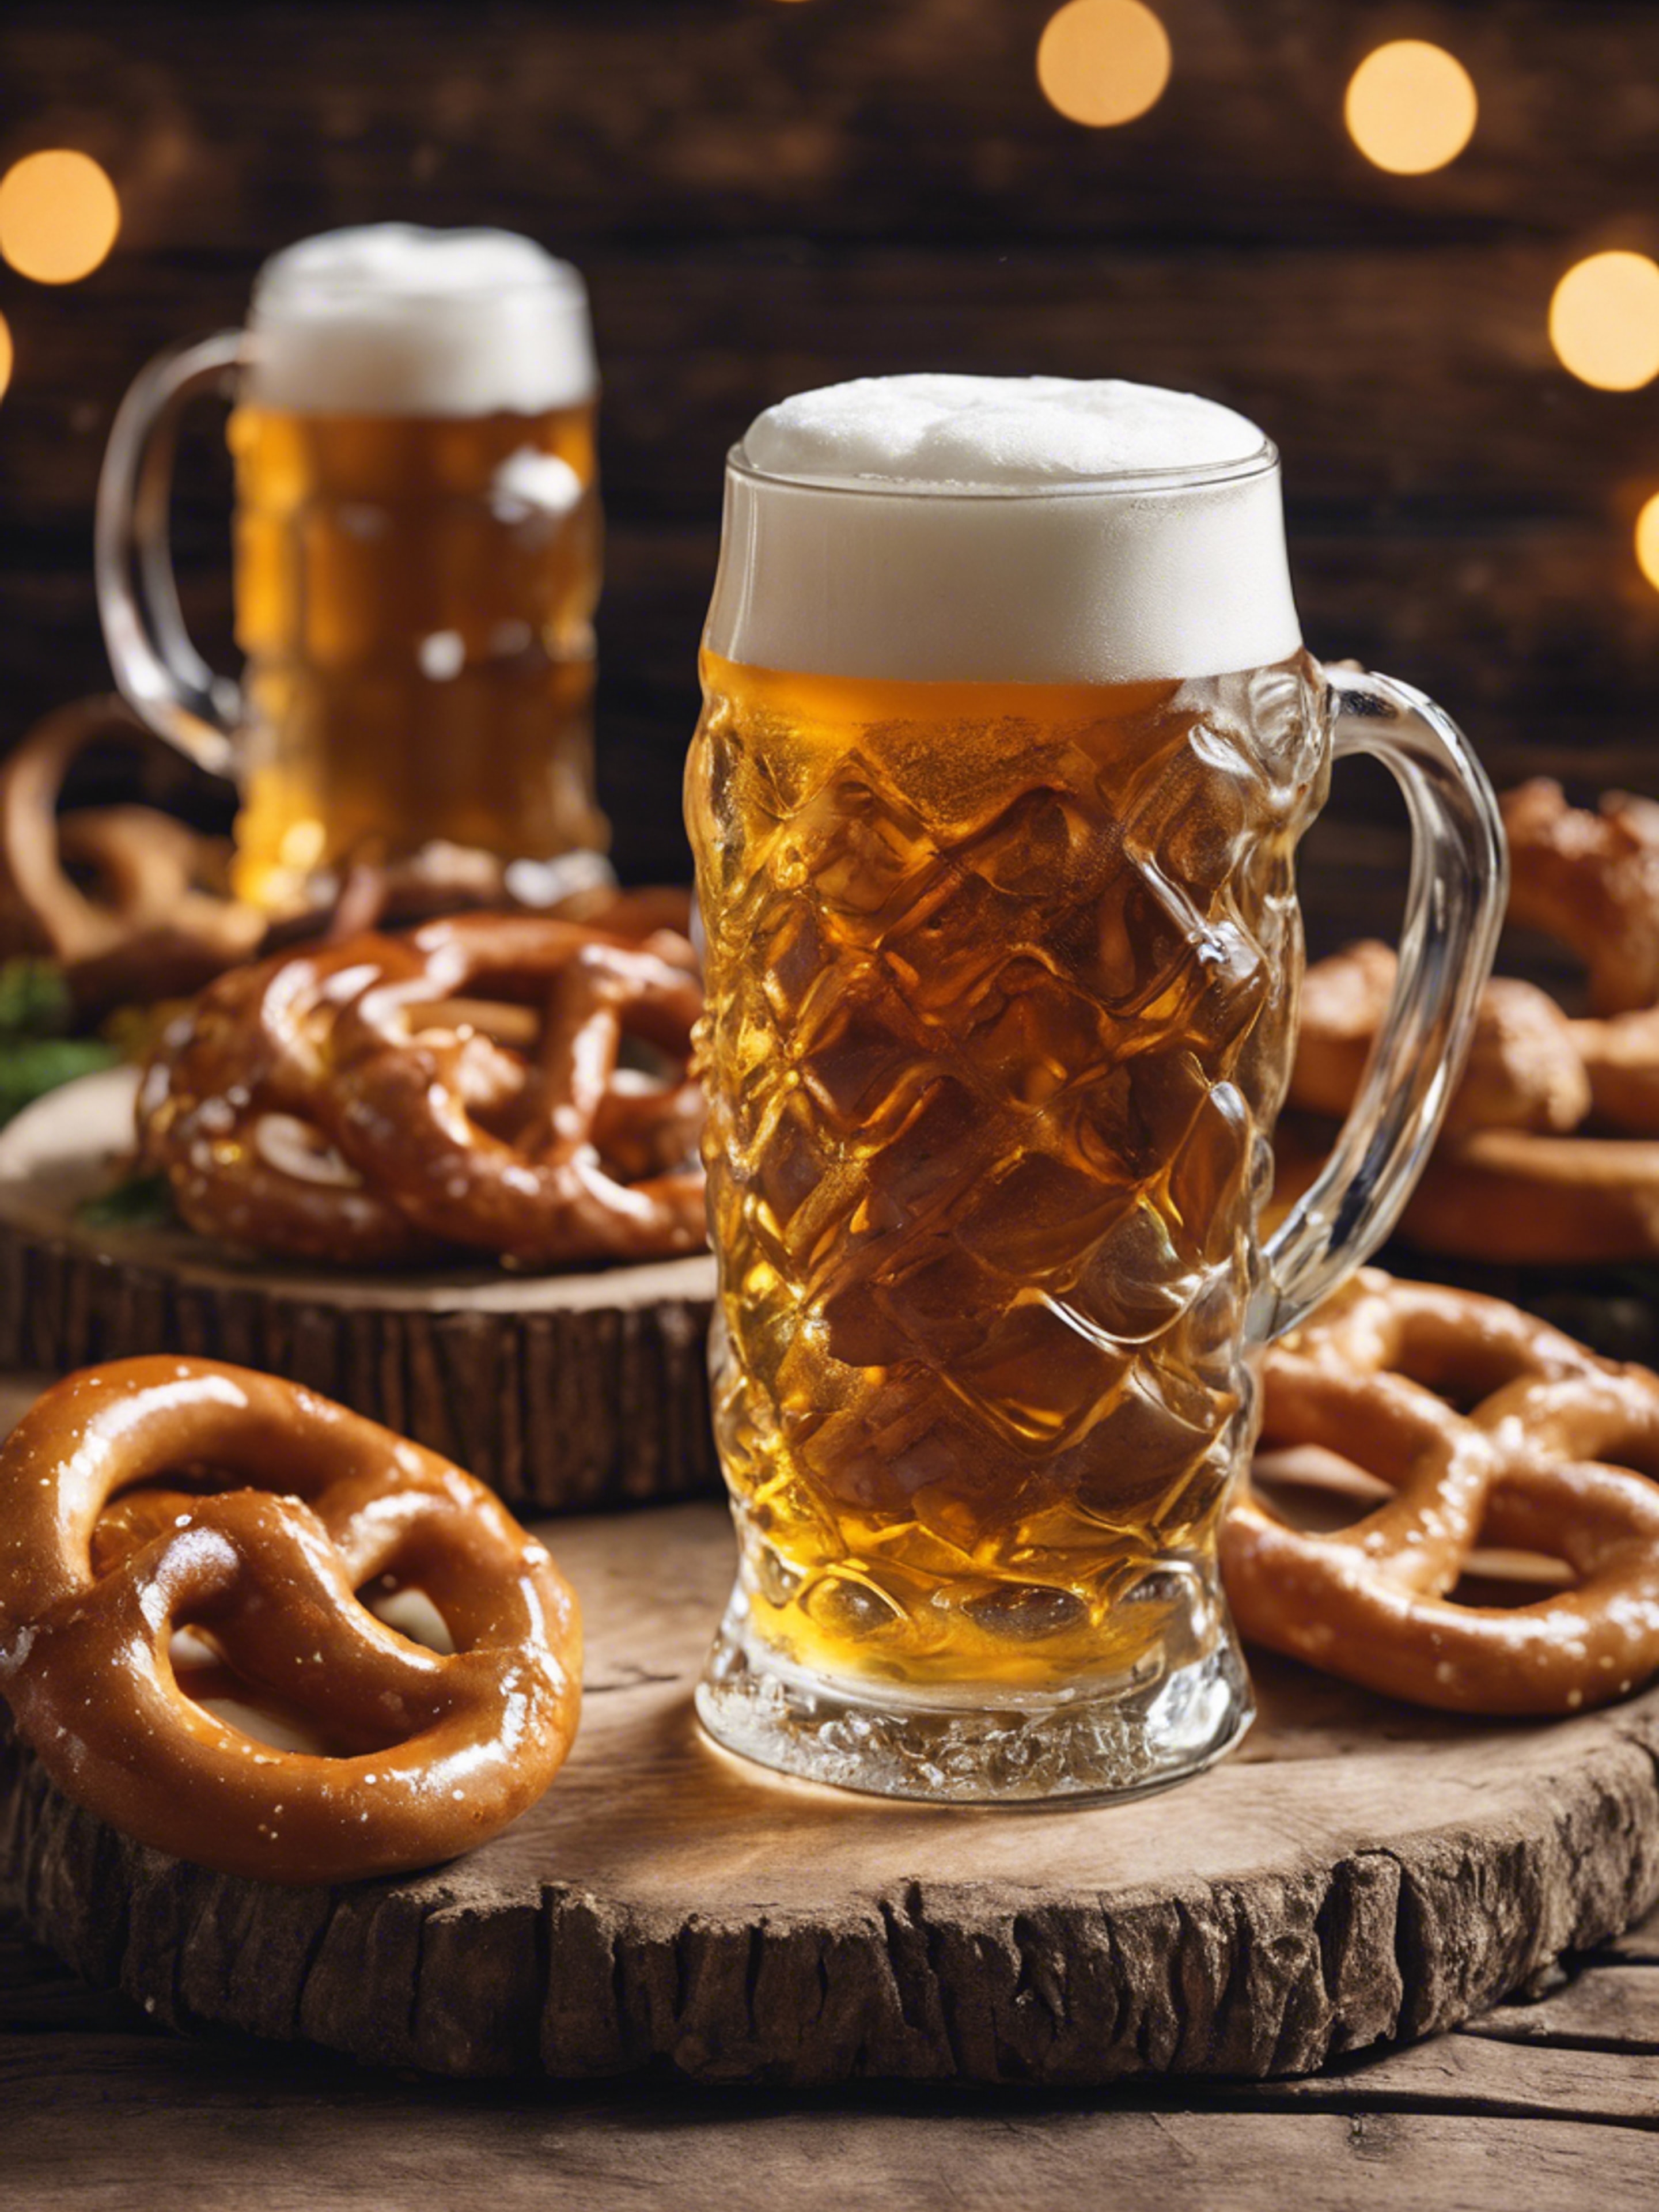 A foamy German beer, pretzels, and other Oktoberfest traditional foods on a rustic wooden table. טפט[8867ca72213c4237bd6d]